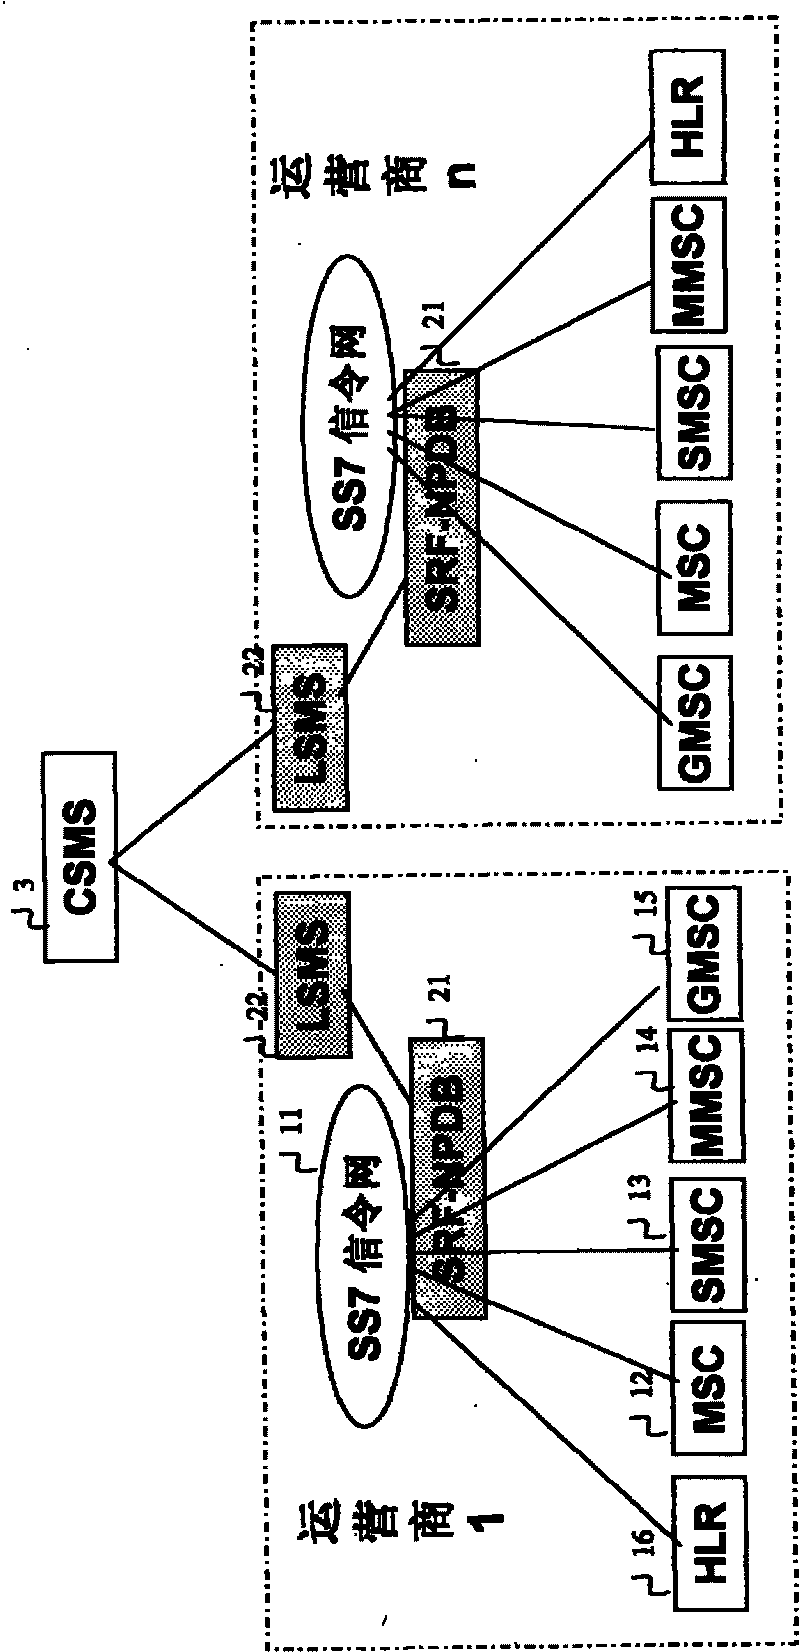 Mobile telecommunication number portability system based on signaling relay technology